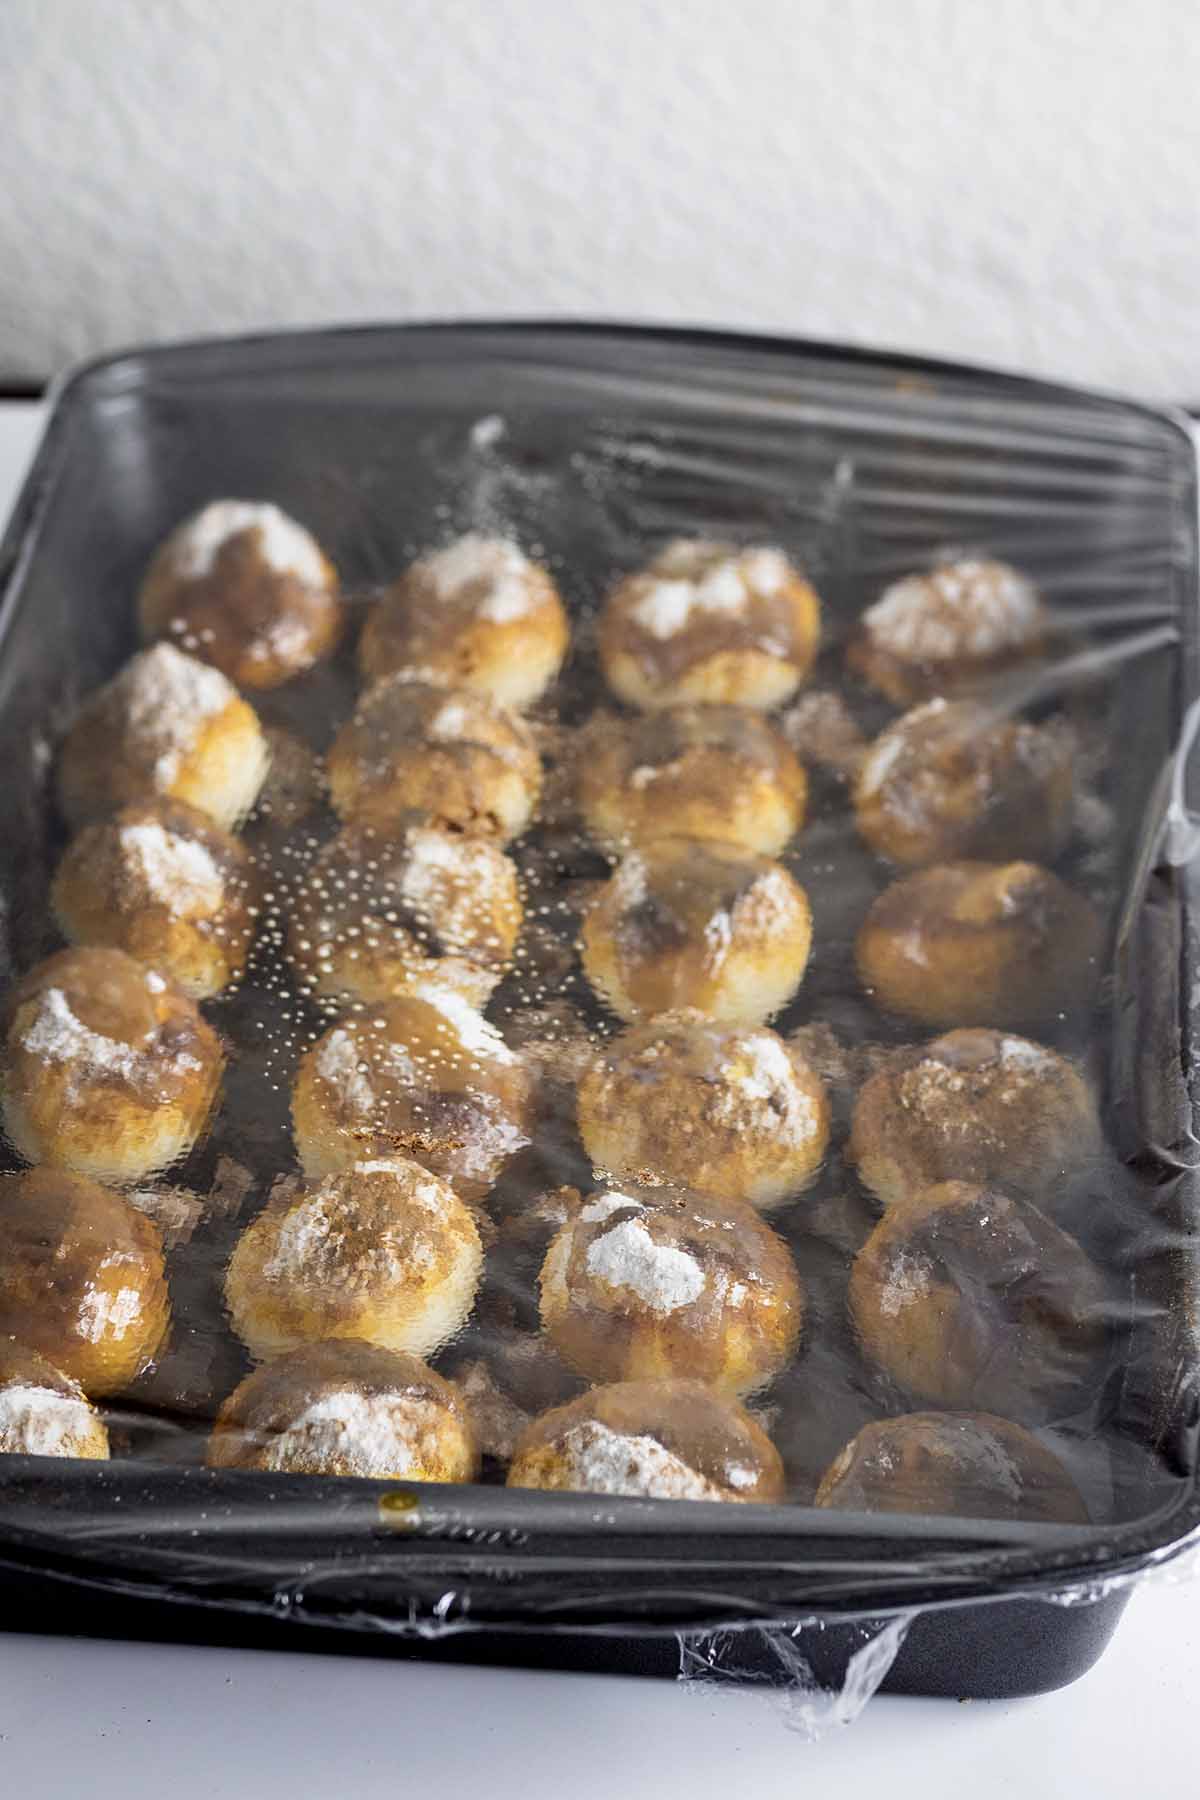 Unbaked rolls in a baking pan covered with plastic wrap